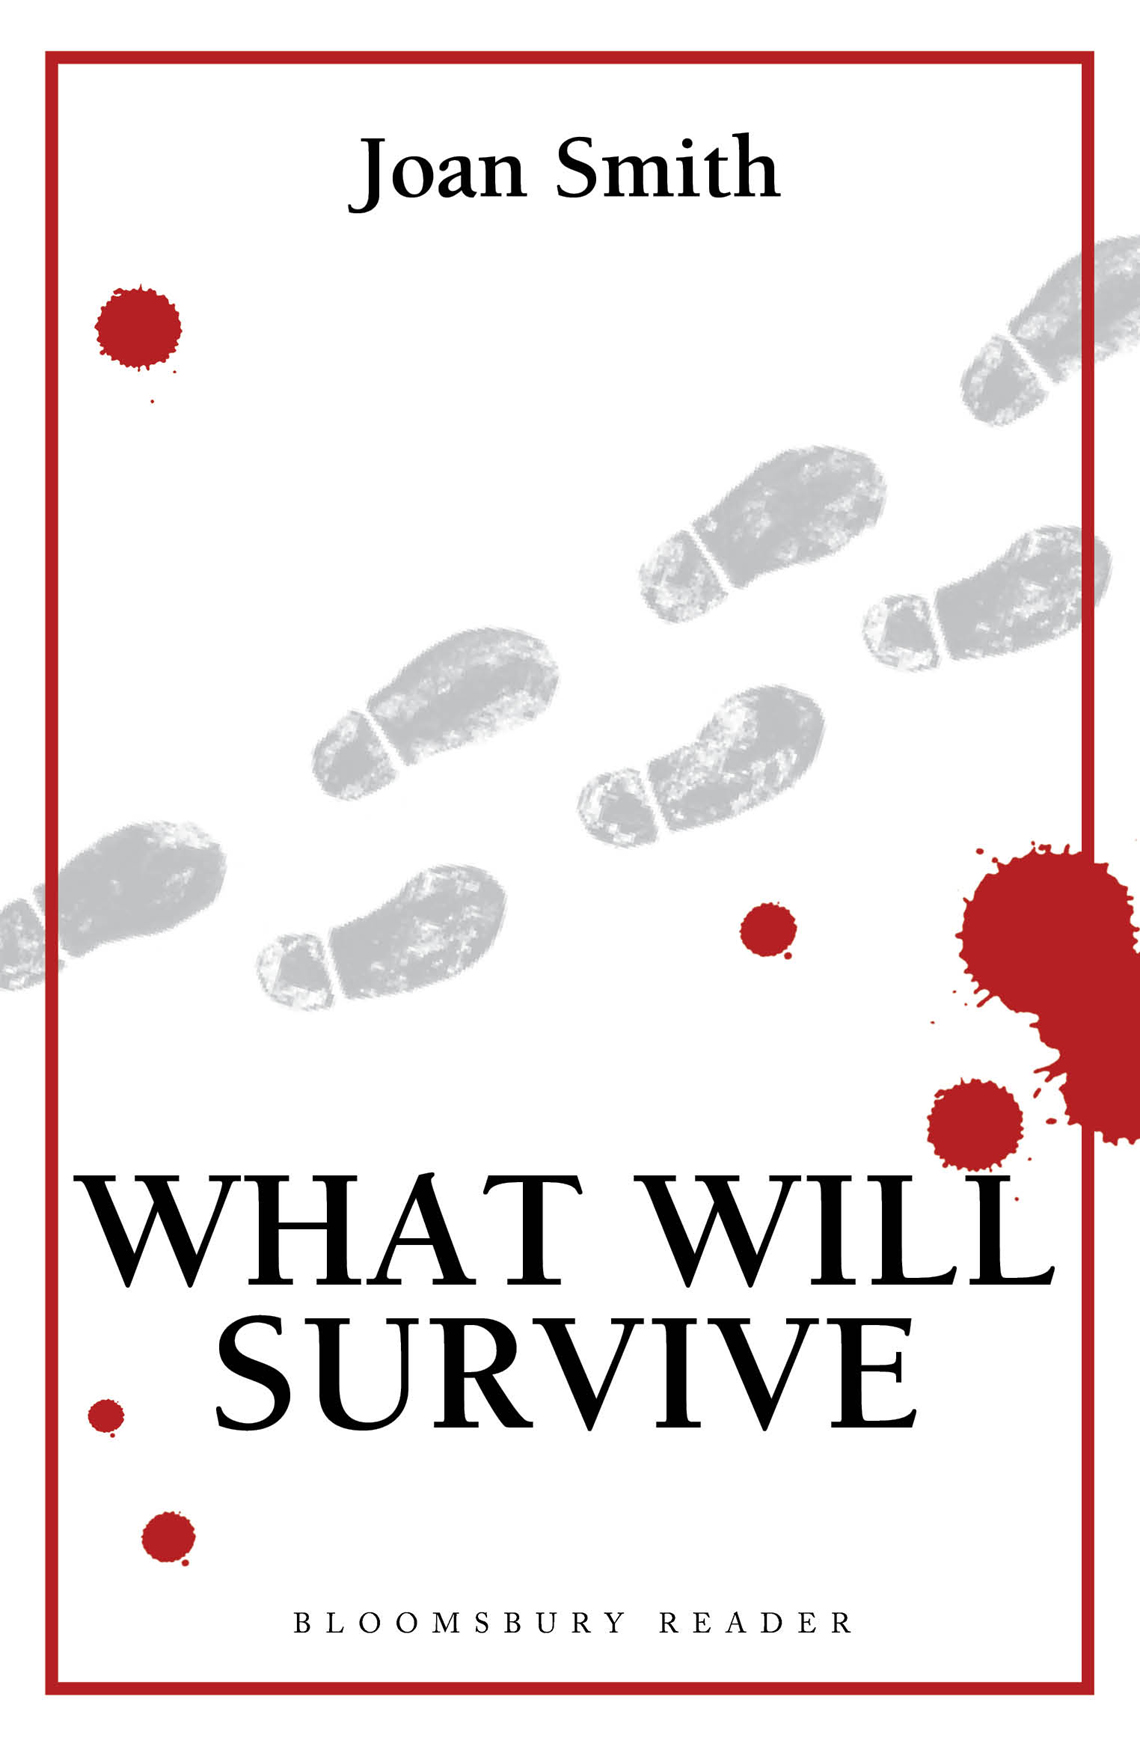 What Will Survive (2007) by Joan Smith